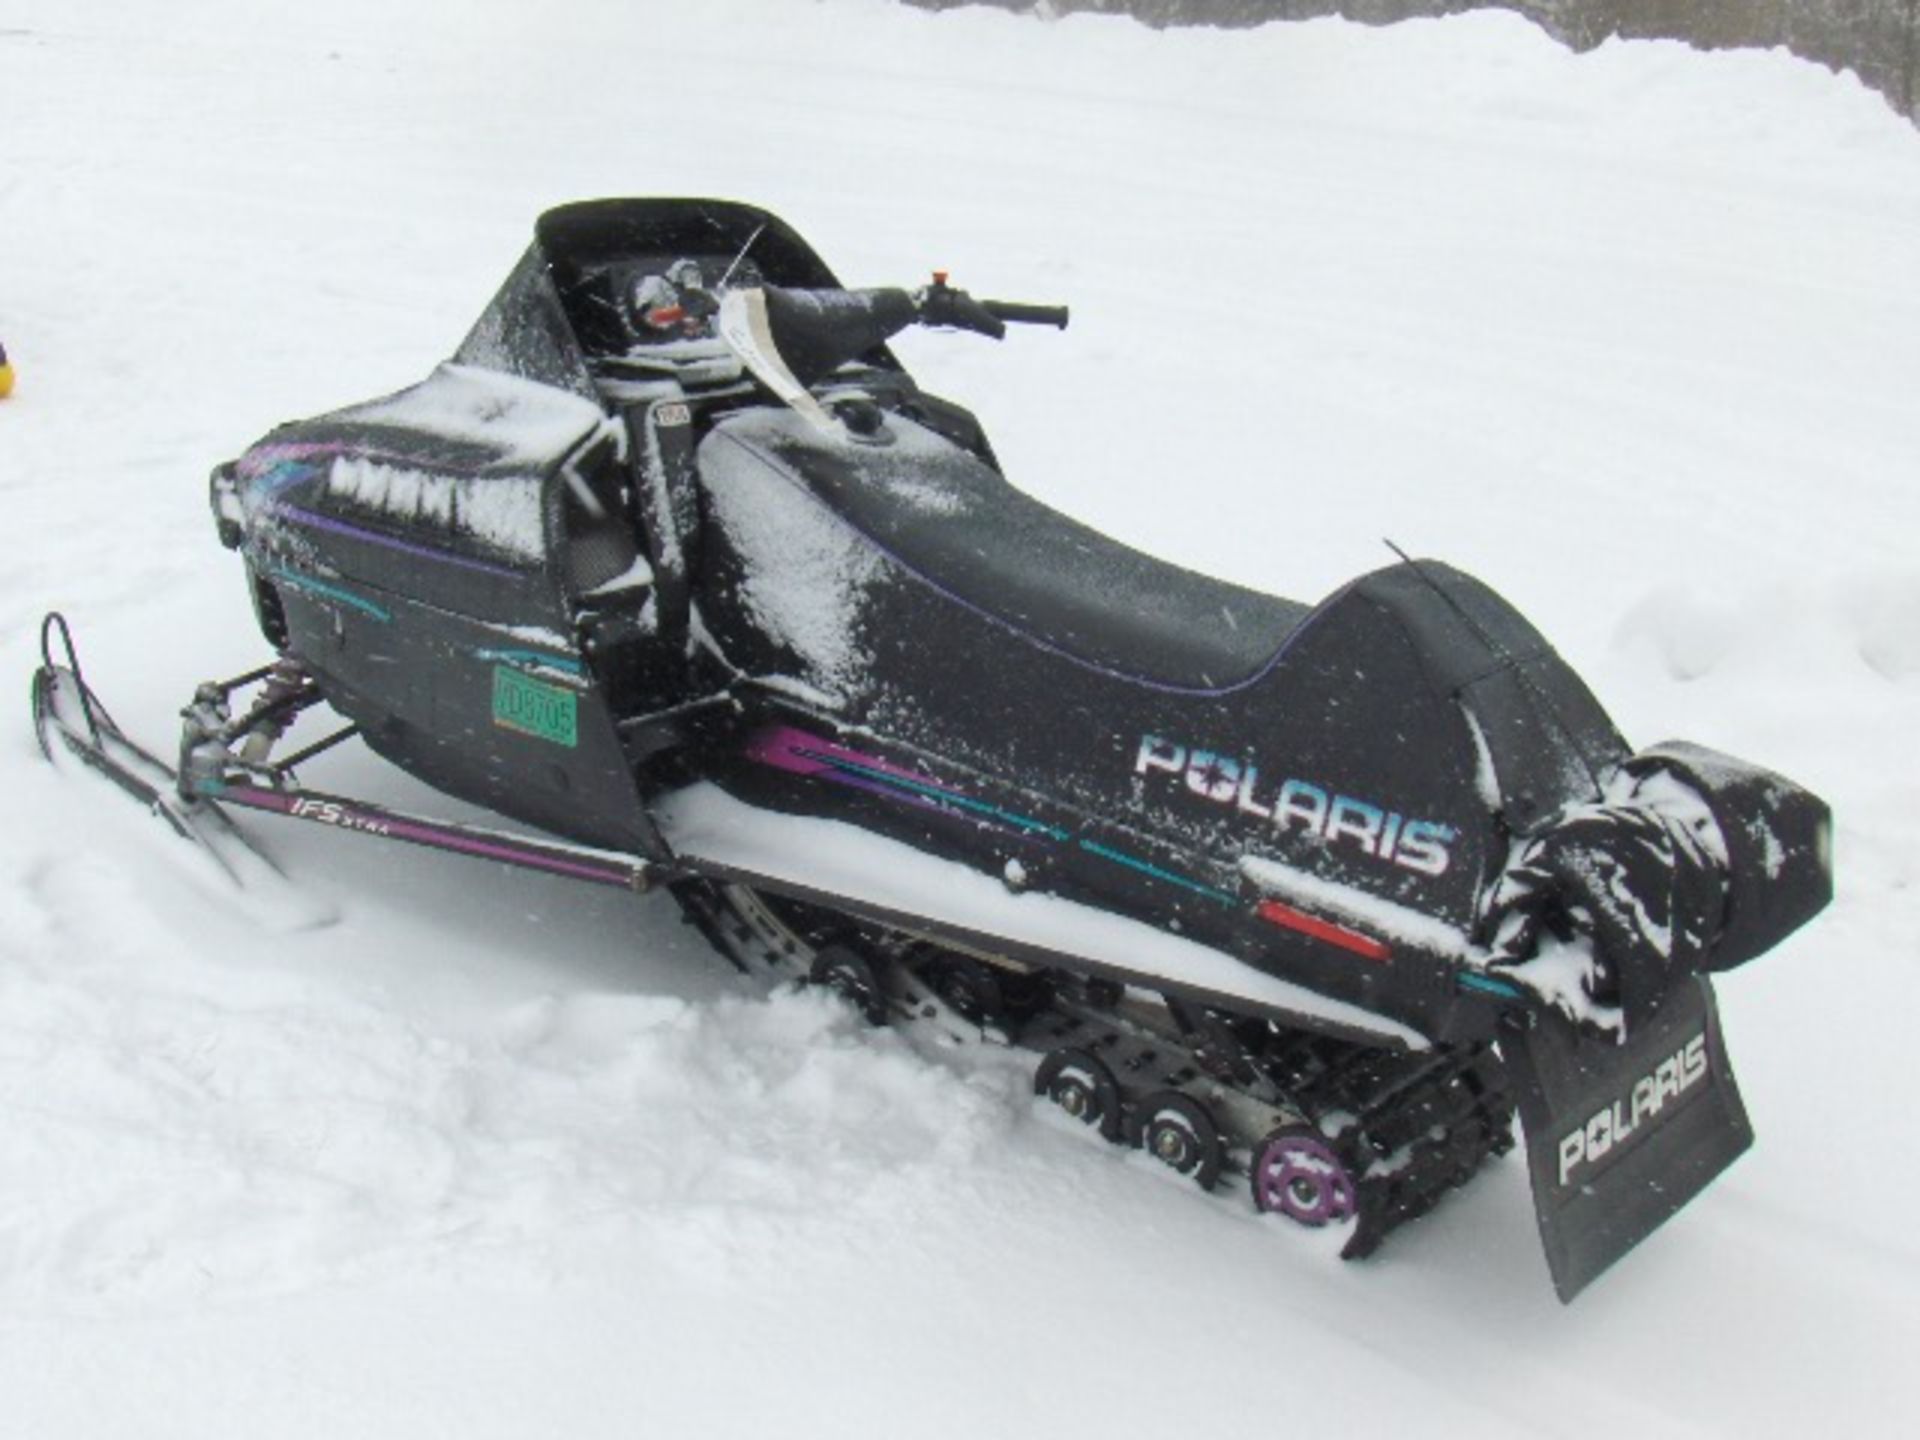 1996 POLARIS 650 RXL  2609775 snowmobile, owner started at time of auction check in, owners - Image 4 of 4